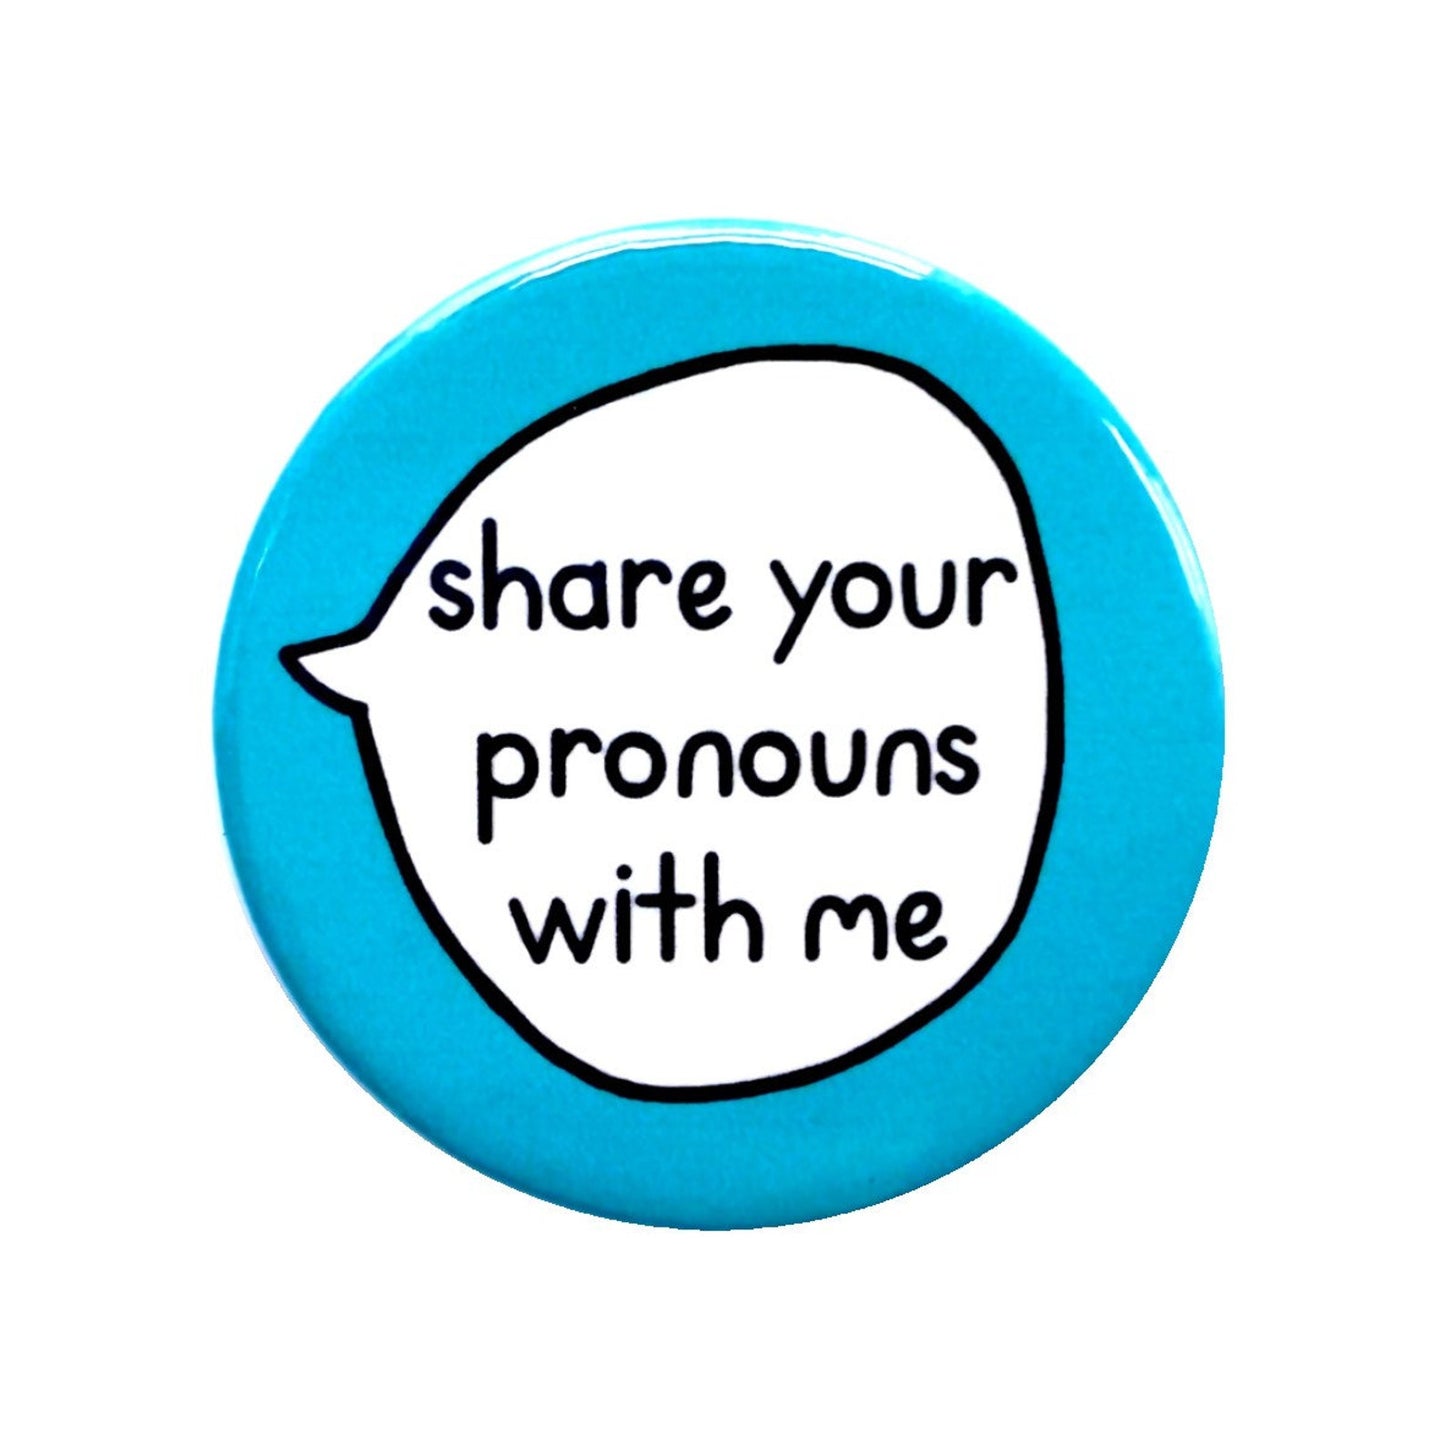 Share Your Pronouns With Me - Pin Badge